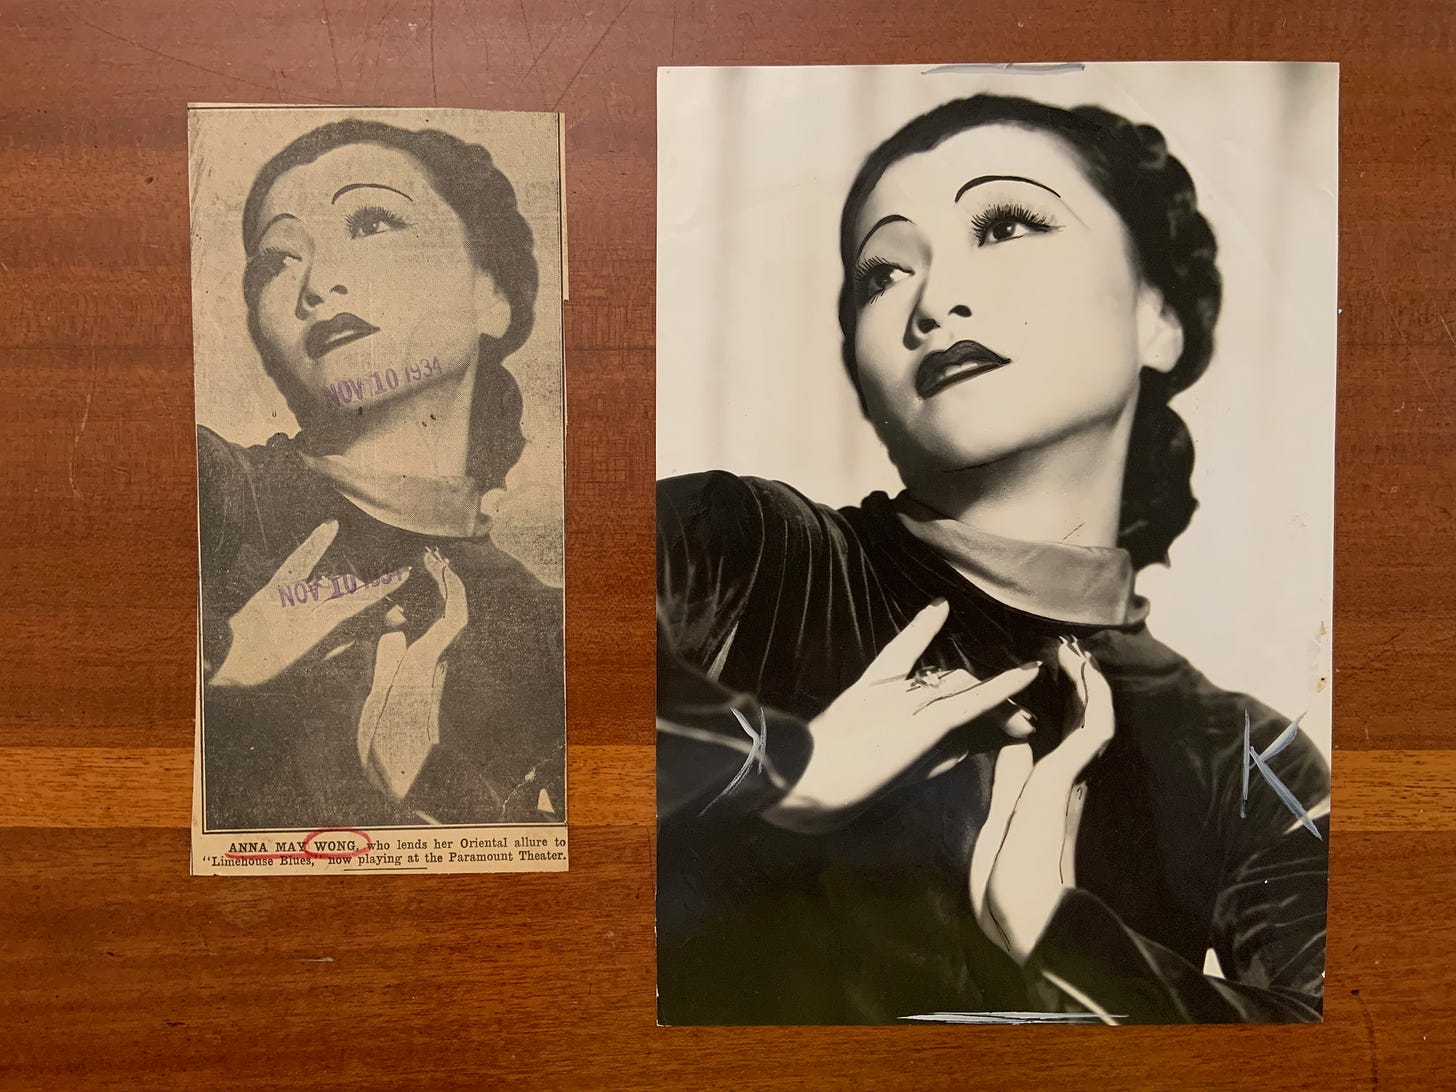 Two clippings of a black and white photo of Anna May Wong from the Los Angeles Examiner, November 10, 1934